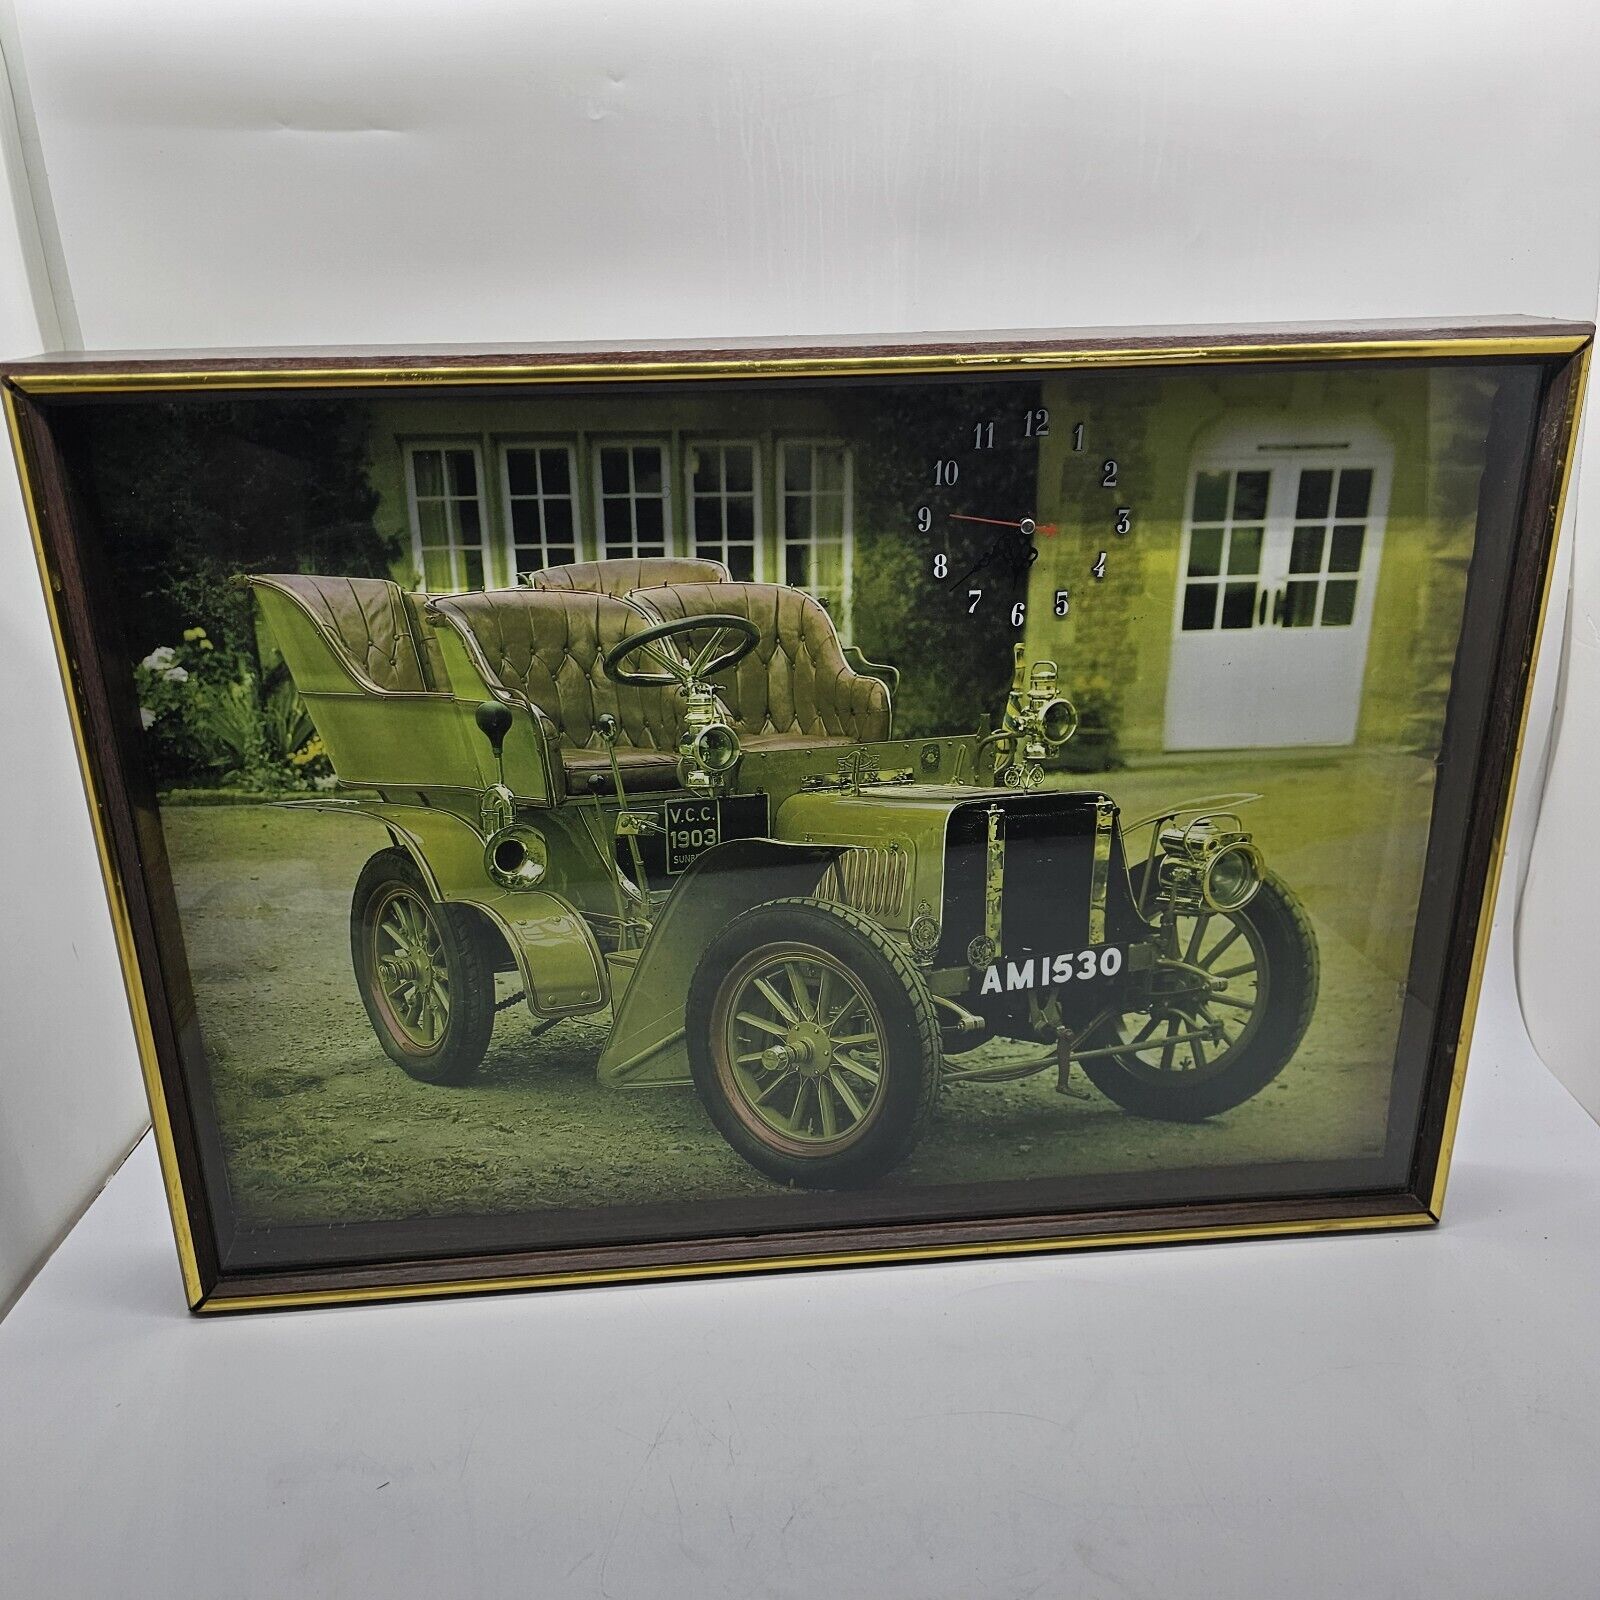 Unique Vintage Framed Wall Clock 1900s Rico Car AM1530 Spanish Classic Made 1981